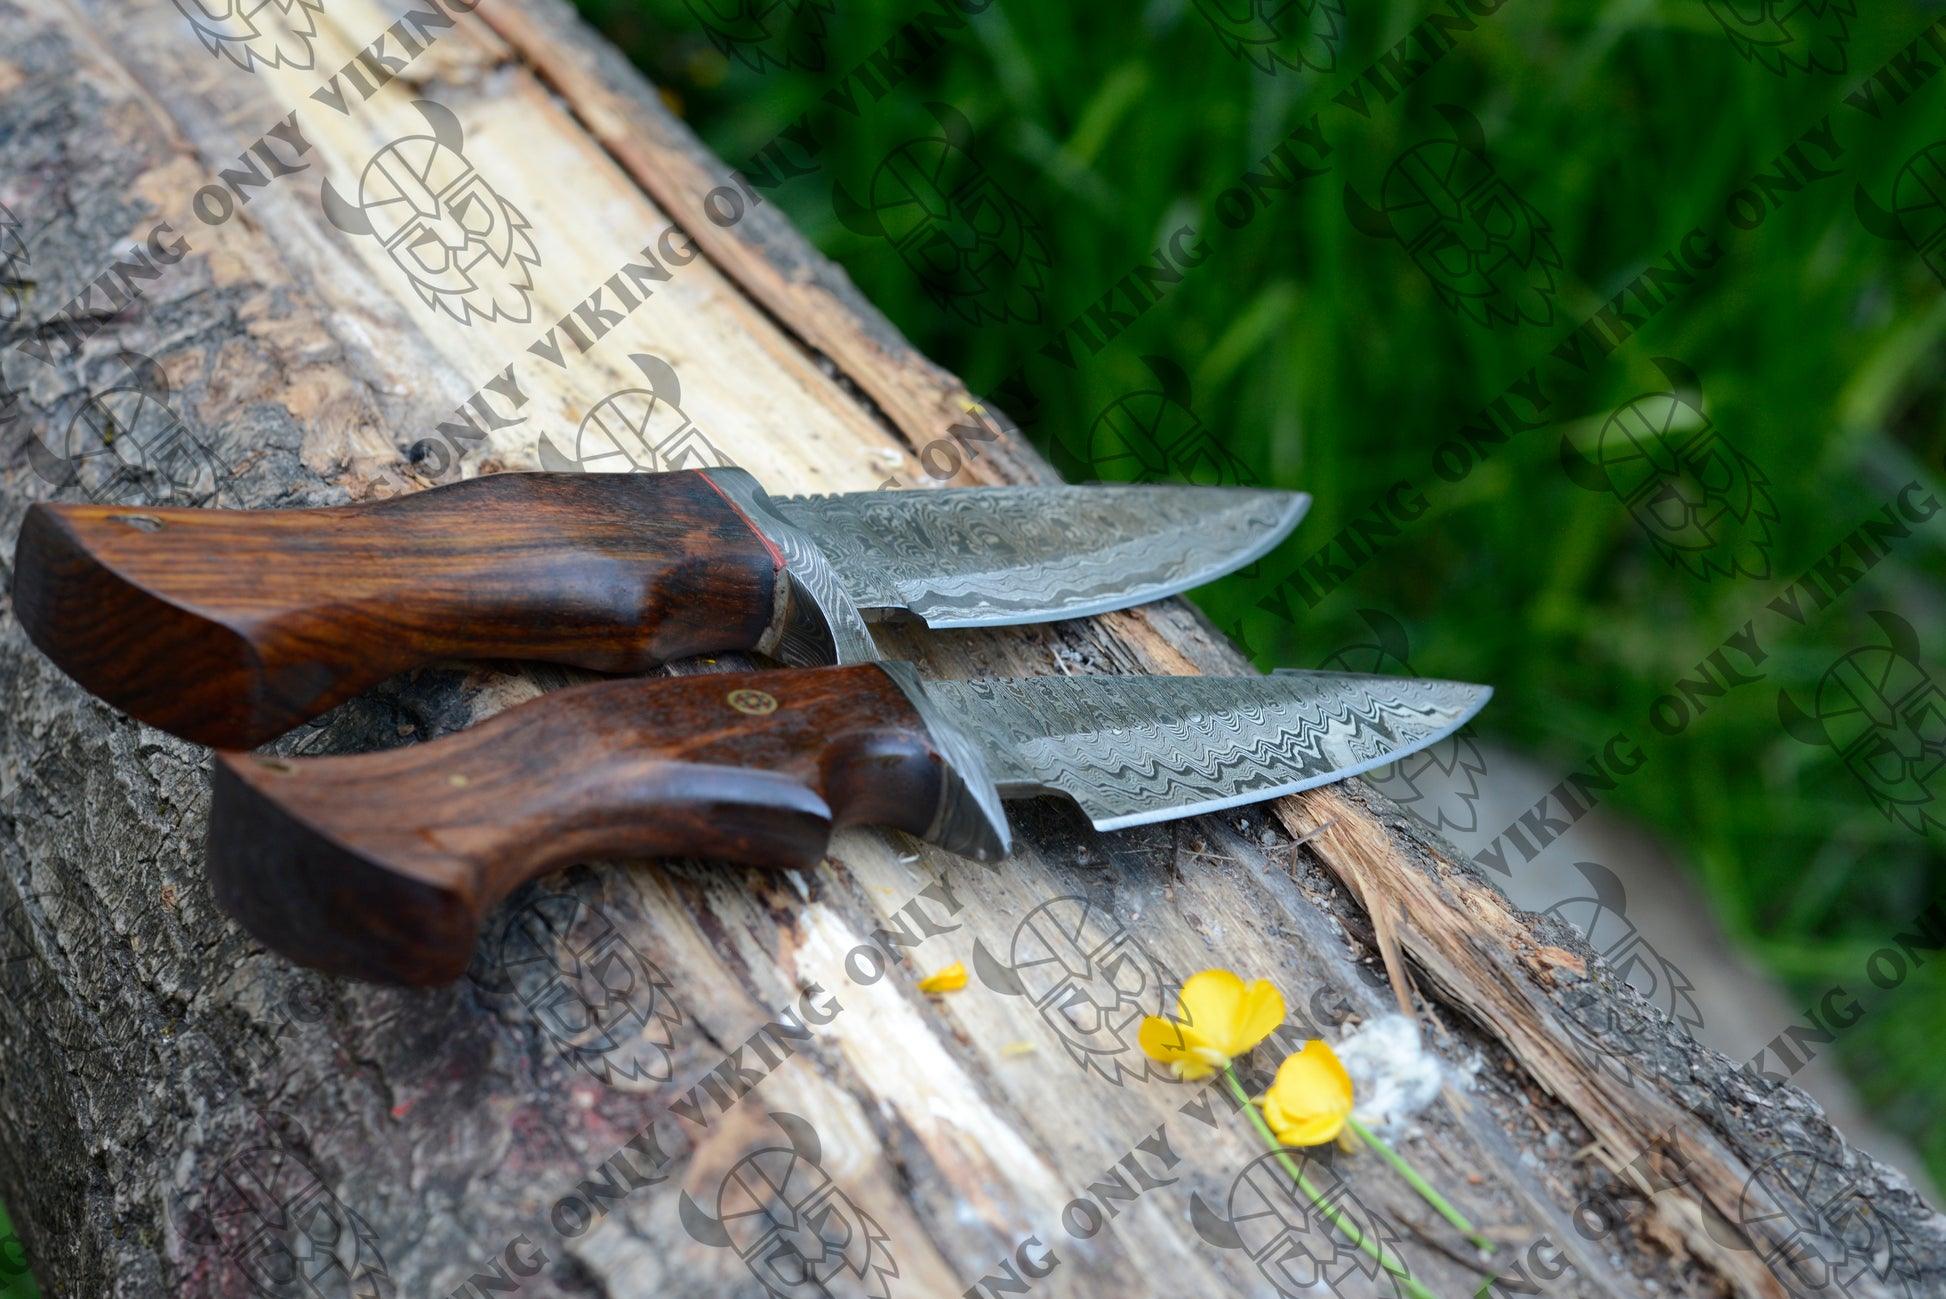 Damascus Knife - Quality Hunting and Camping, OnlyViking